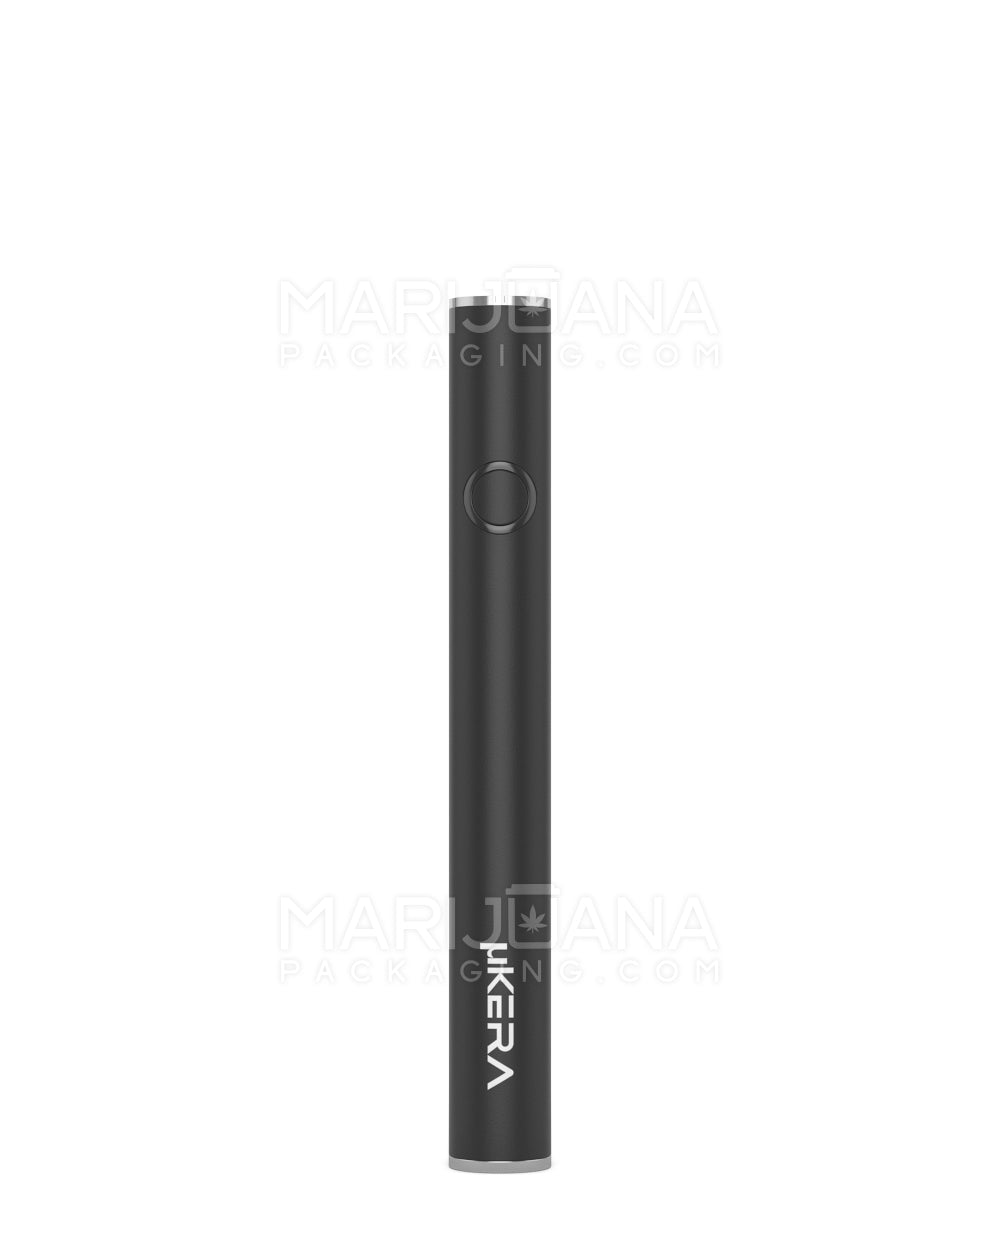 RAE | Variable Voltage Soft Touch Vape Battery | 320mAh - Black - 640 Count - 2